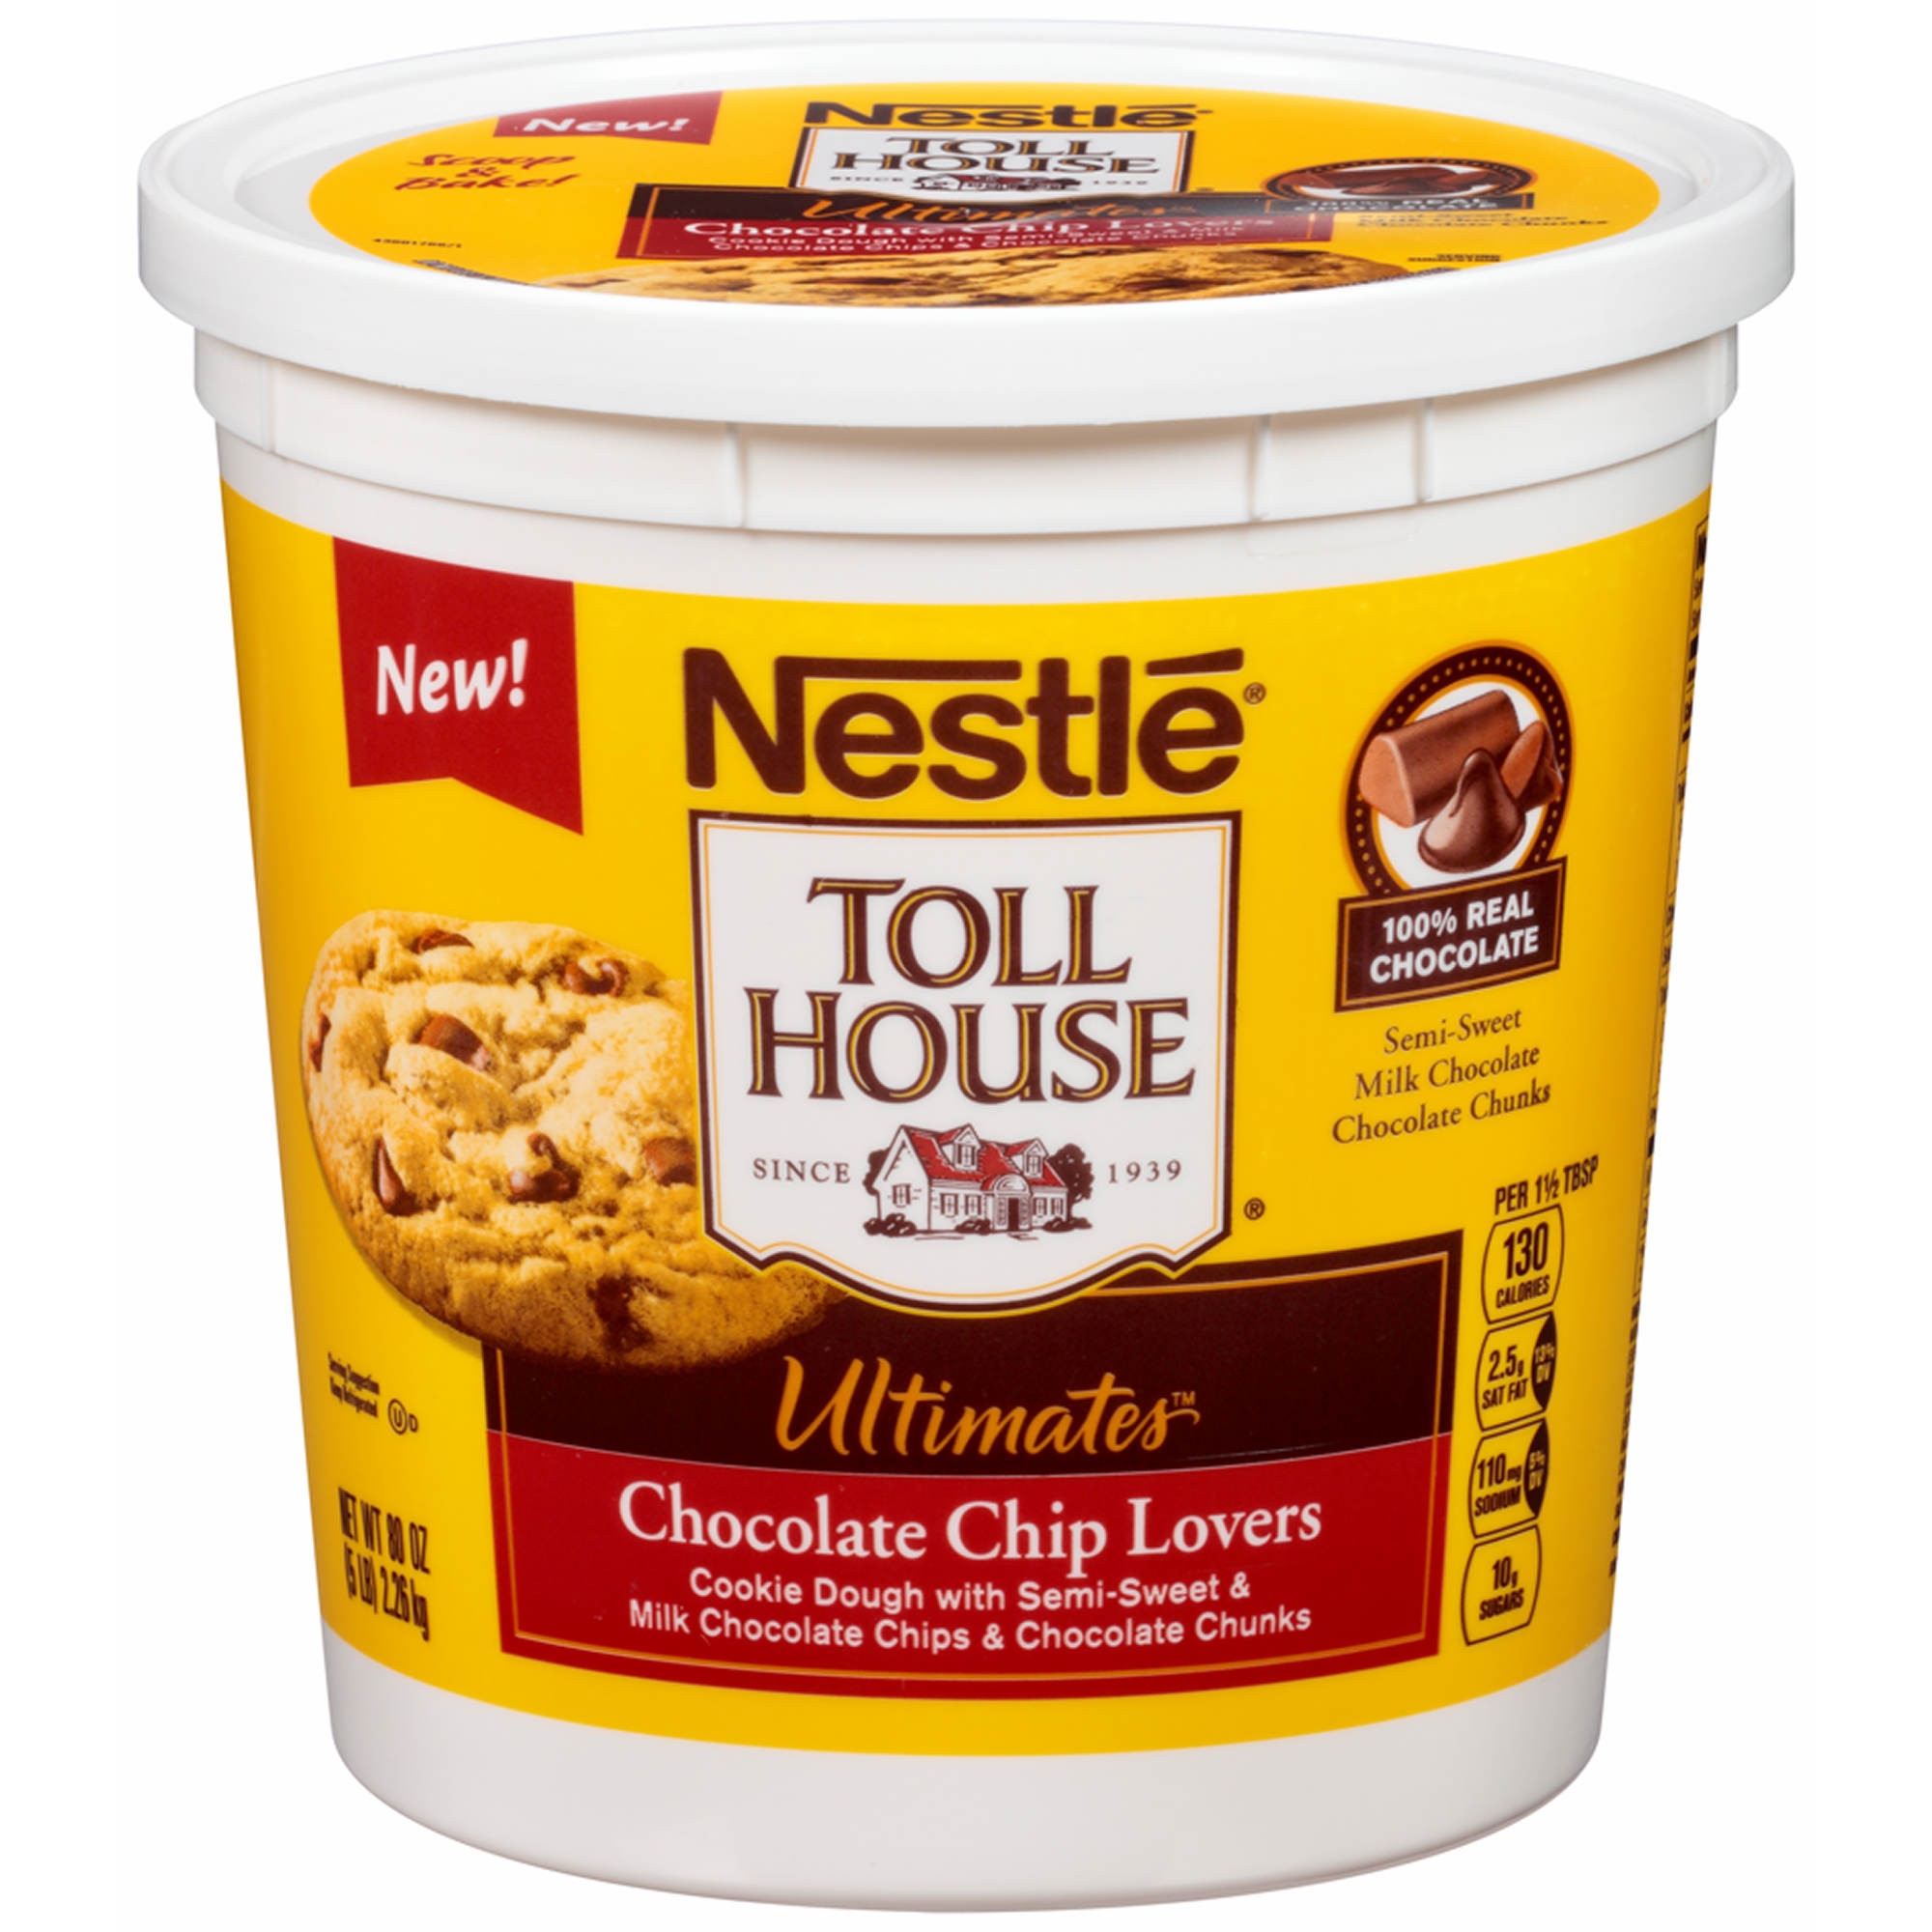 Nestles Chocolate Chip Cookies
 Nestle Toll House Chocolate Chip Lovers Cookie Dough 80